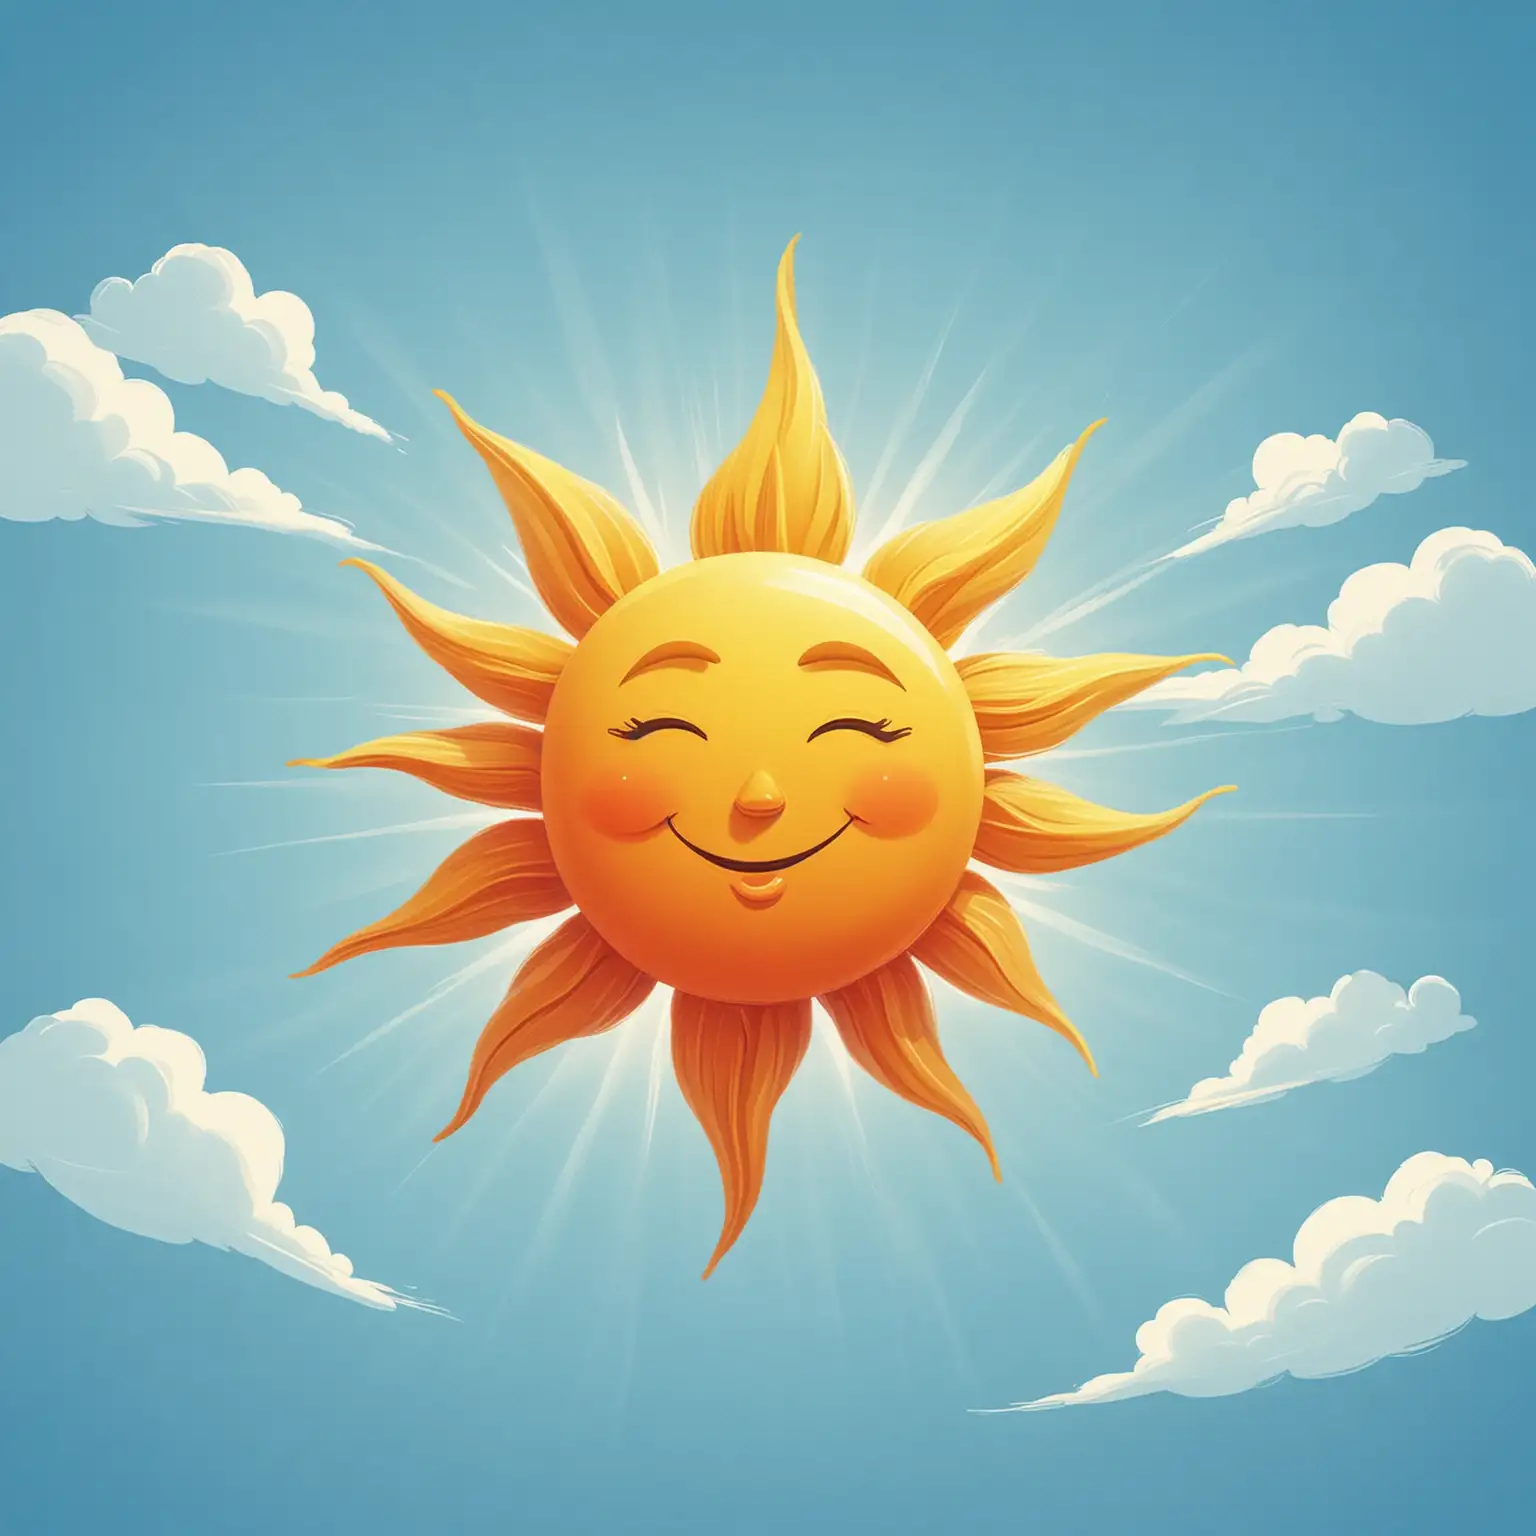 Cheerful Cartoon Sun in Blue Sky with Simple Background